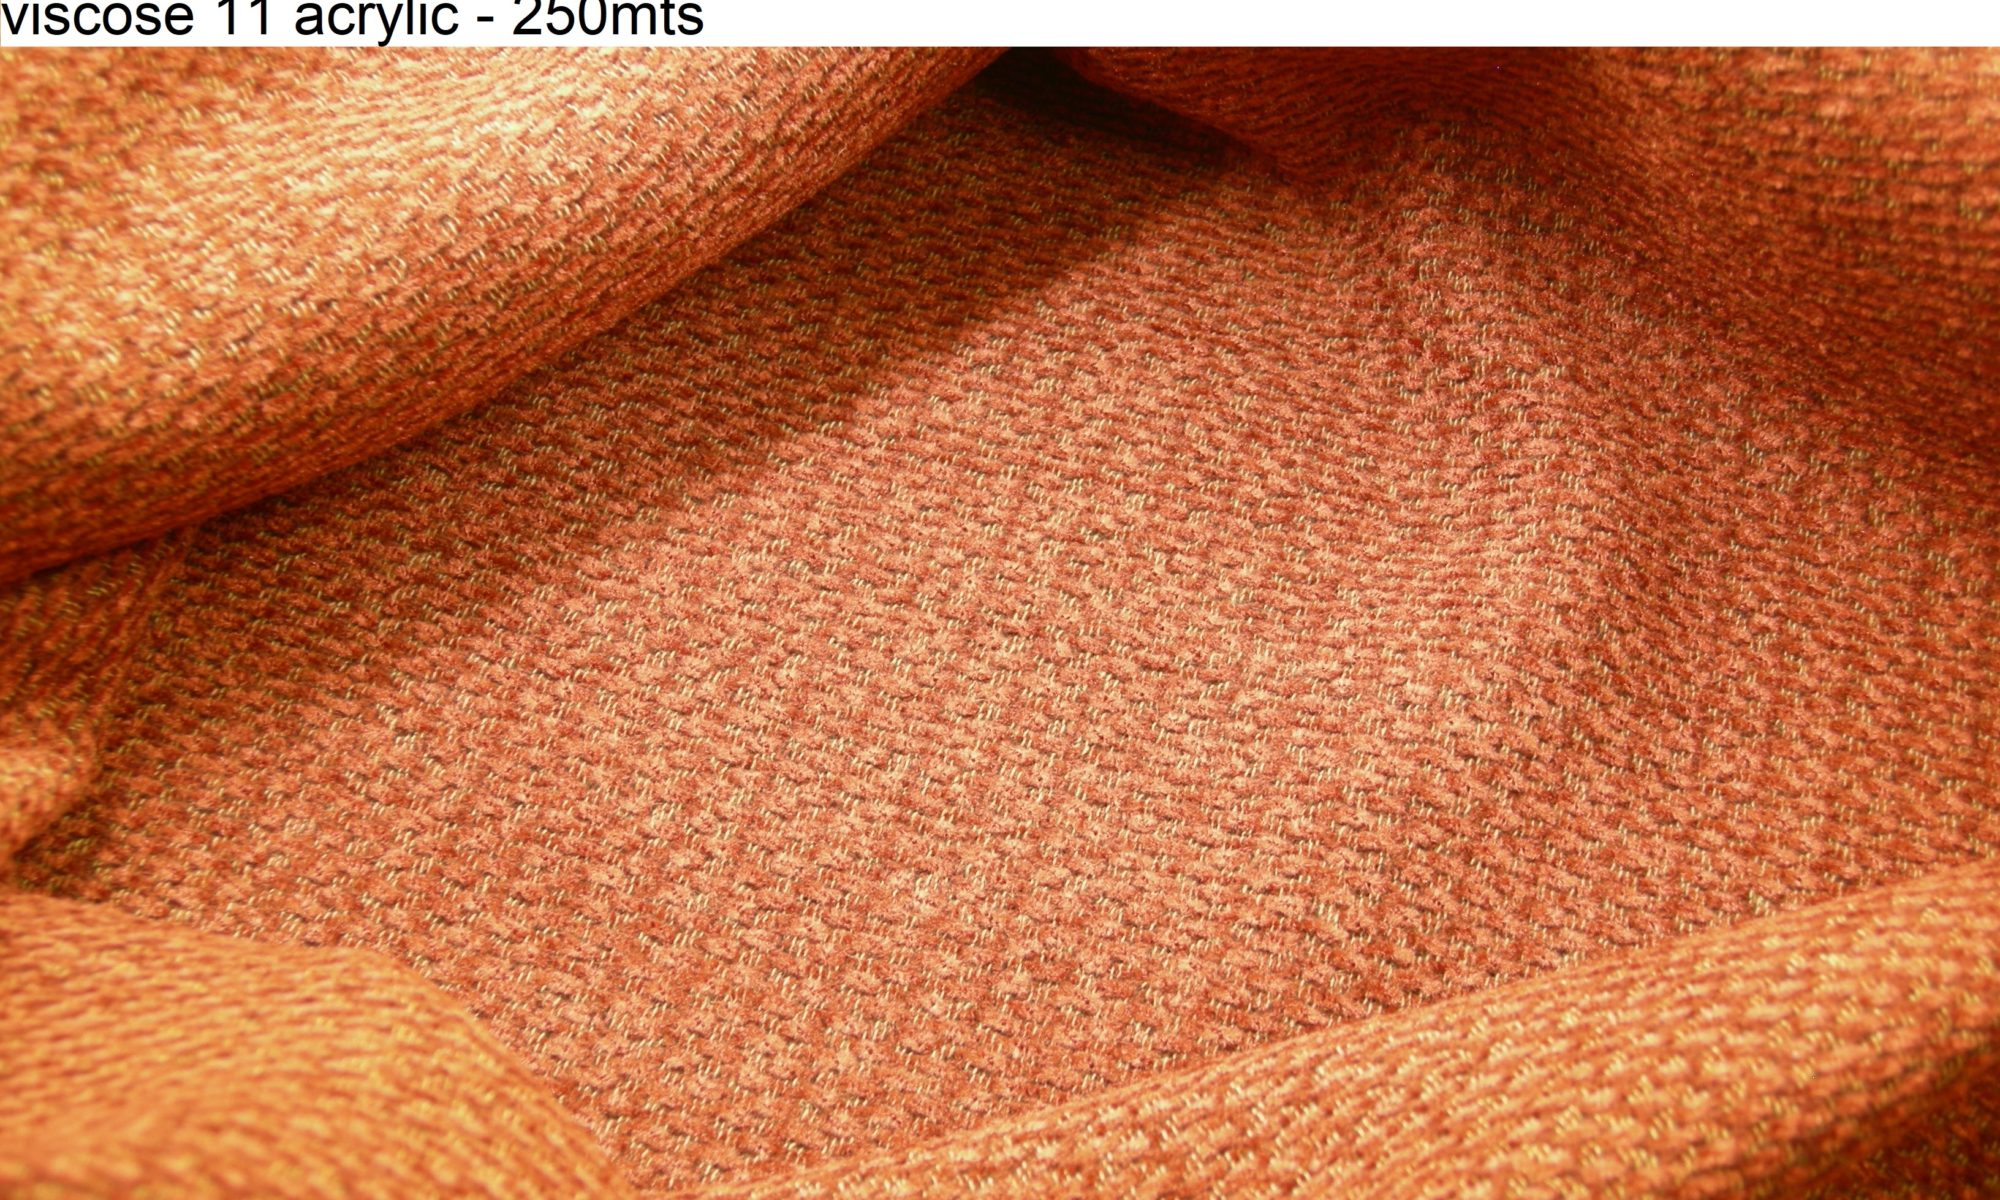 ART 7388 chenille chanel wool blend coat fabric WIDTH cm150 WEIGHT gr460 - gr306 square meter - COMPOSITION 51 wool 25 polyammide 13 viscose 11 acrylic - 250mts